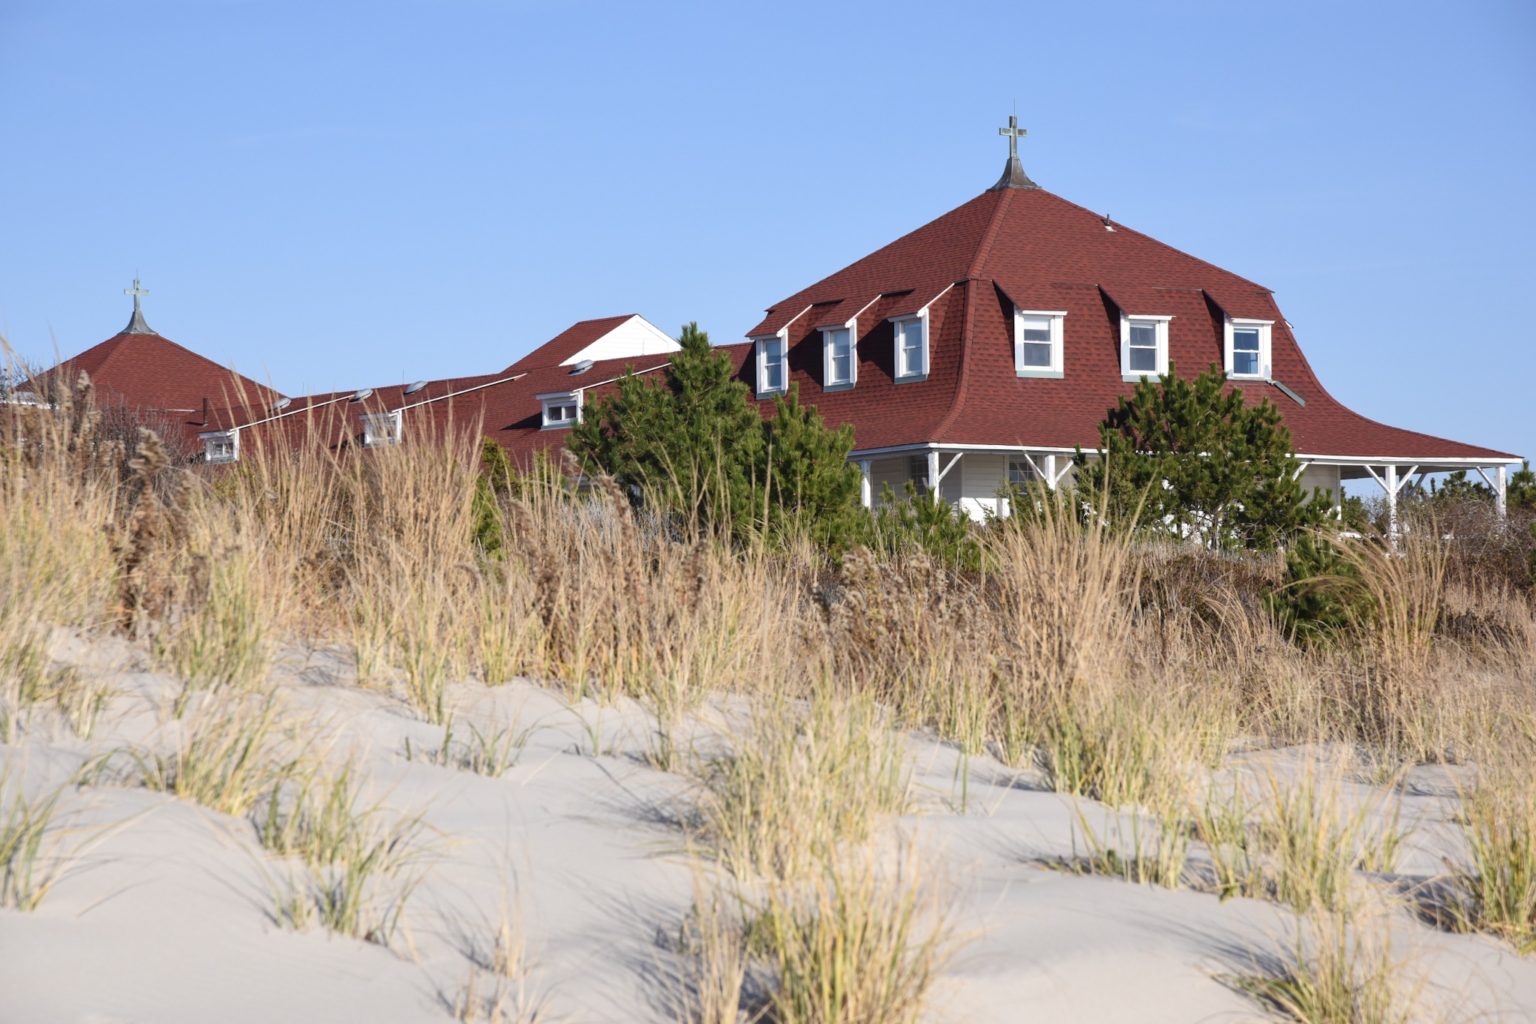 The Cape May Point Science Center